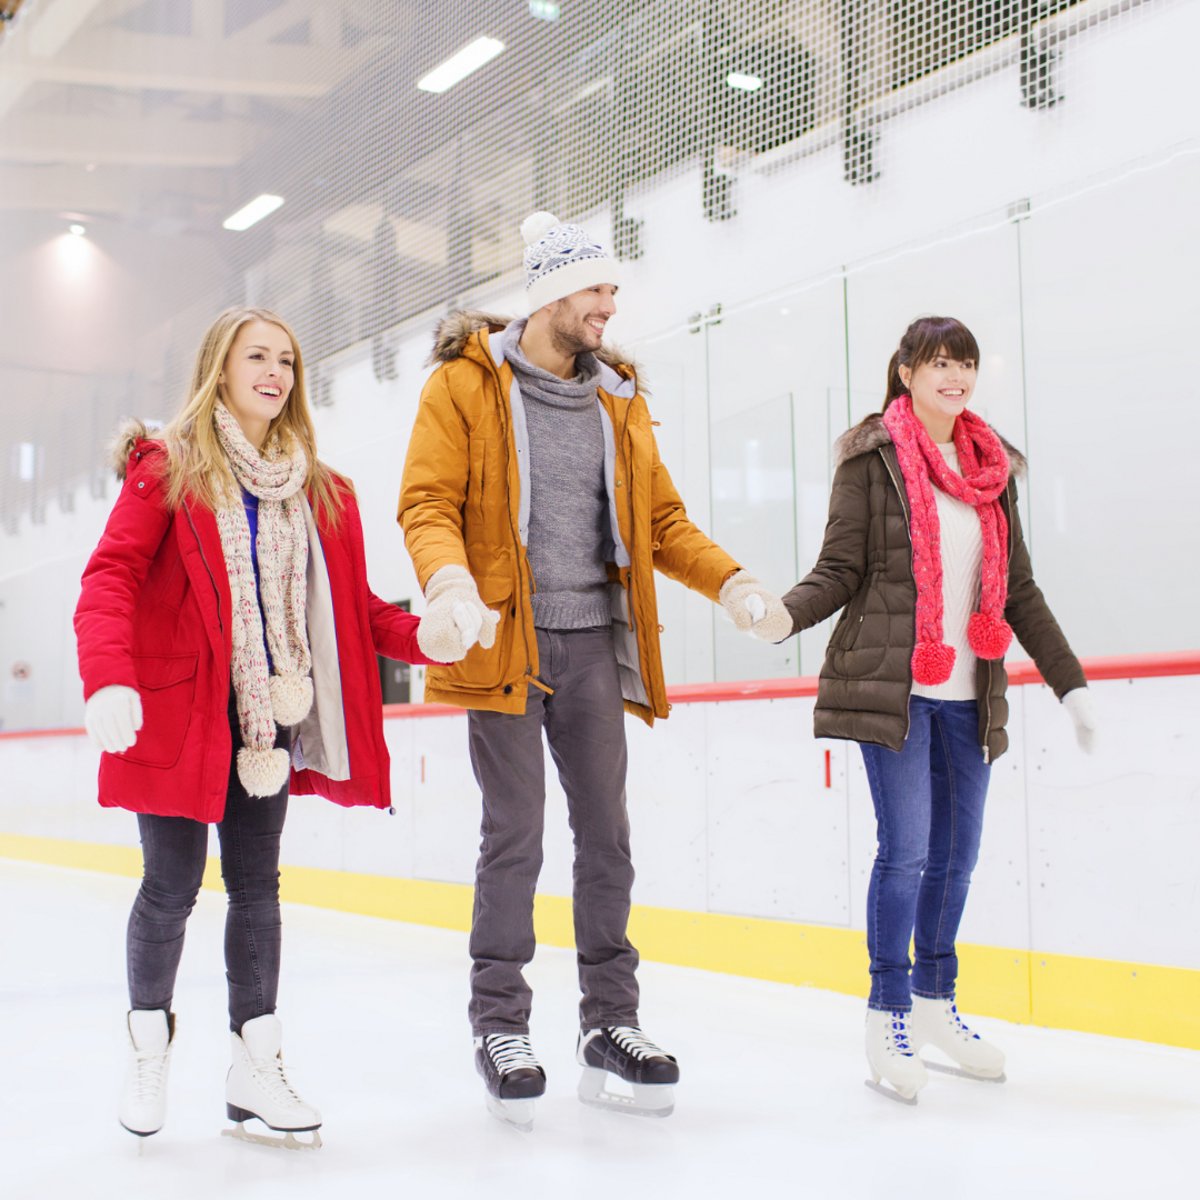 Grab your friends and family together and go #iceskating before the 15th to enjoy some ice skating fun! The ice rink at #BristolMotorSpeedway is the region's longest-standing ice #skatingrink. Get your tickets today https://t.co/CoXGpfUNYL https://t.co/cWnFrqGA9E